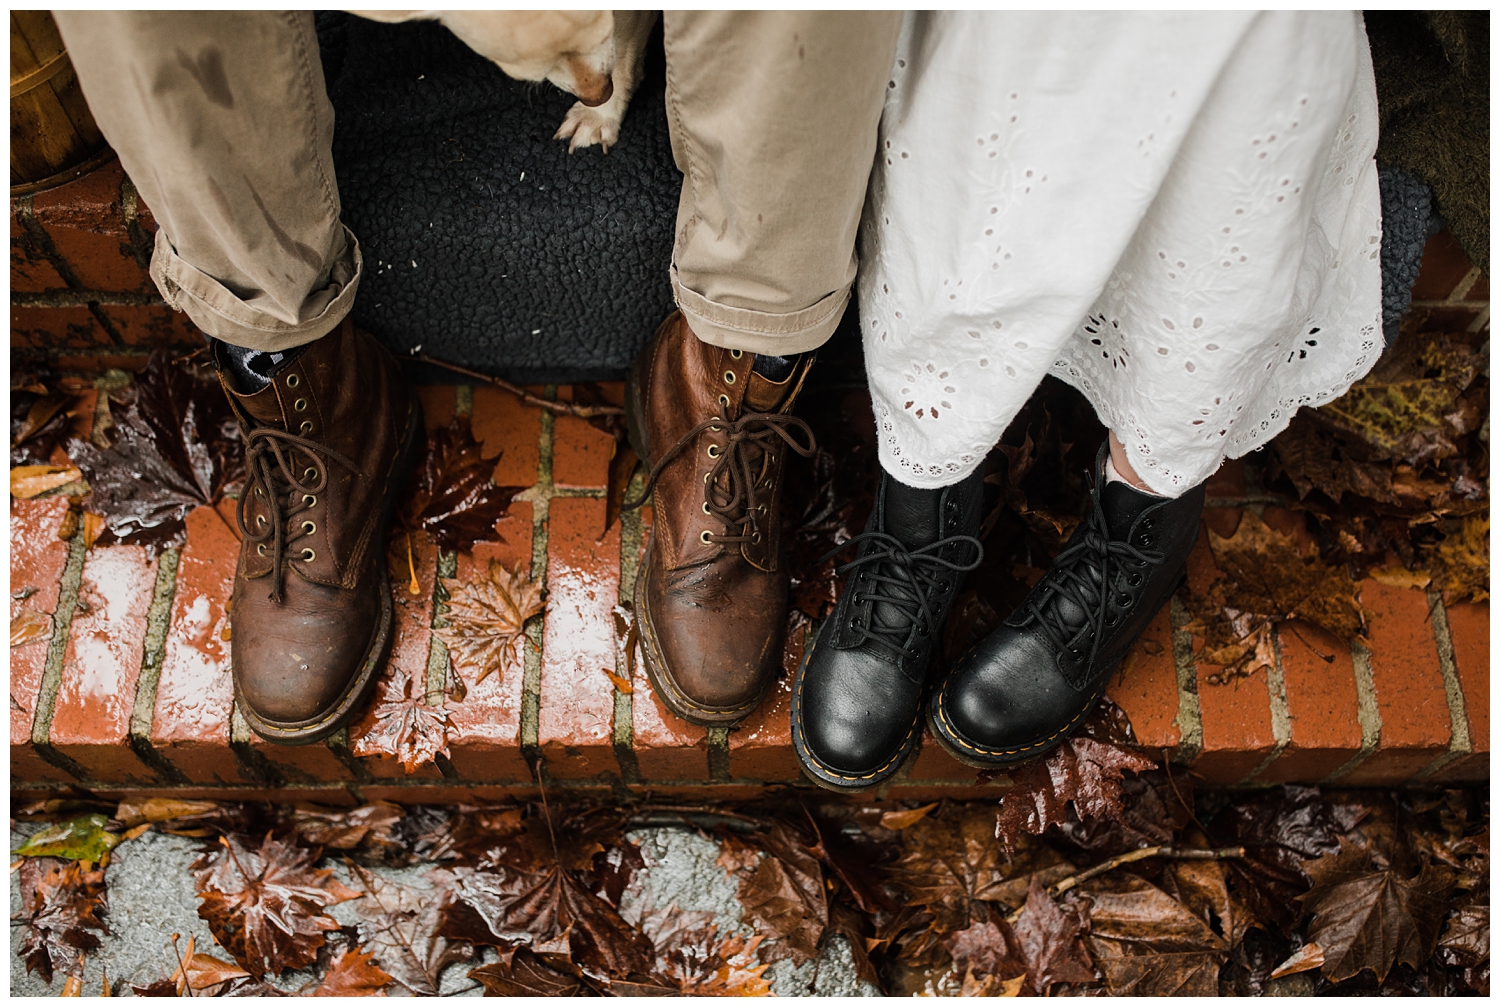 Rainy Day Engagement Session in Marietta, Georgia with cute couple sitting on their front porch with their two rescue dogs